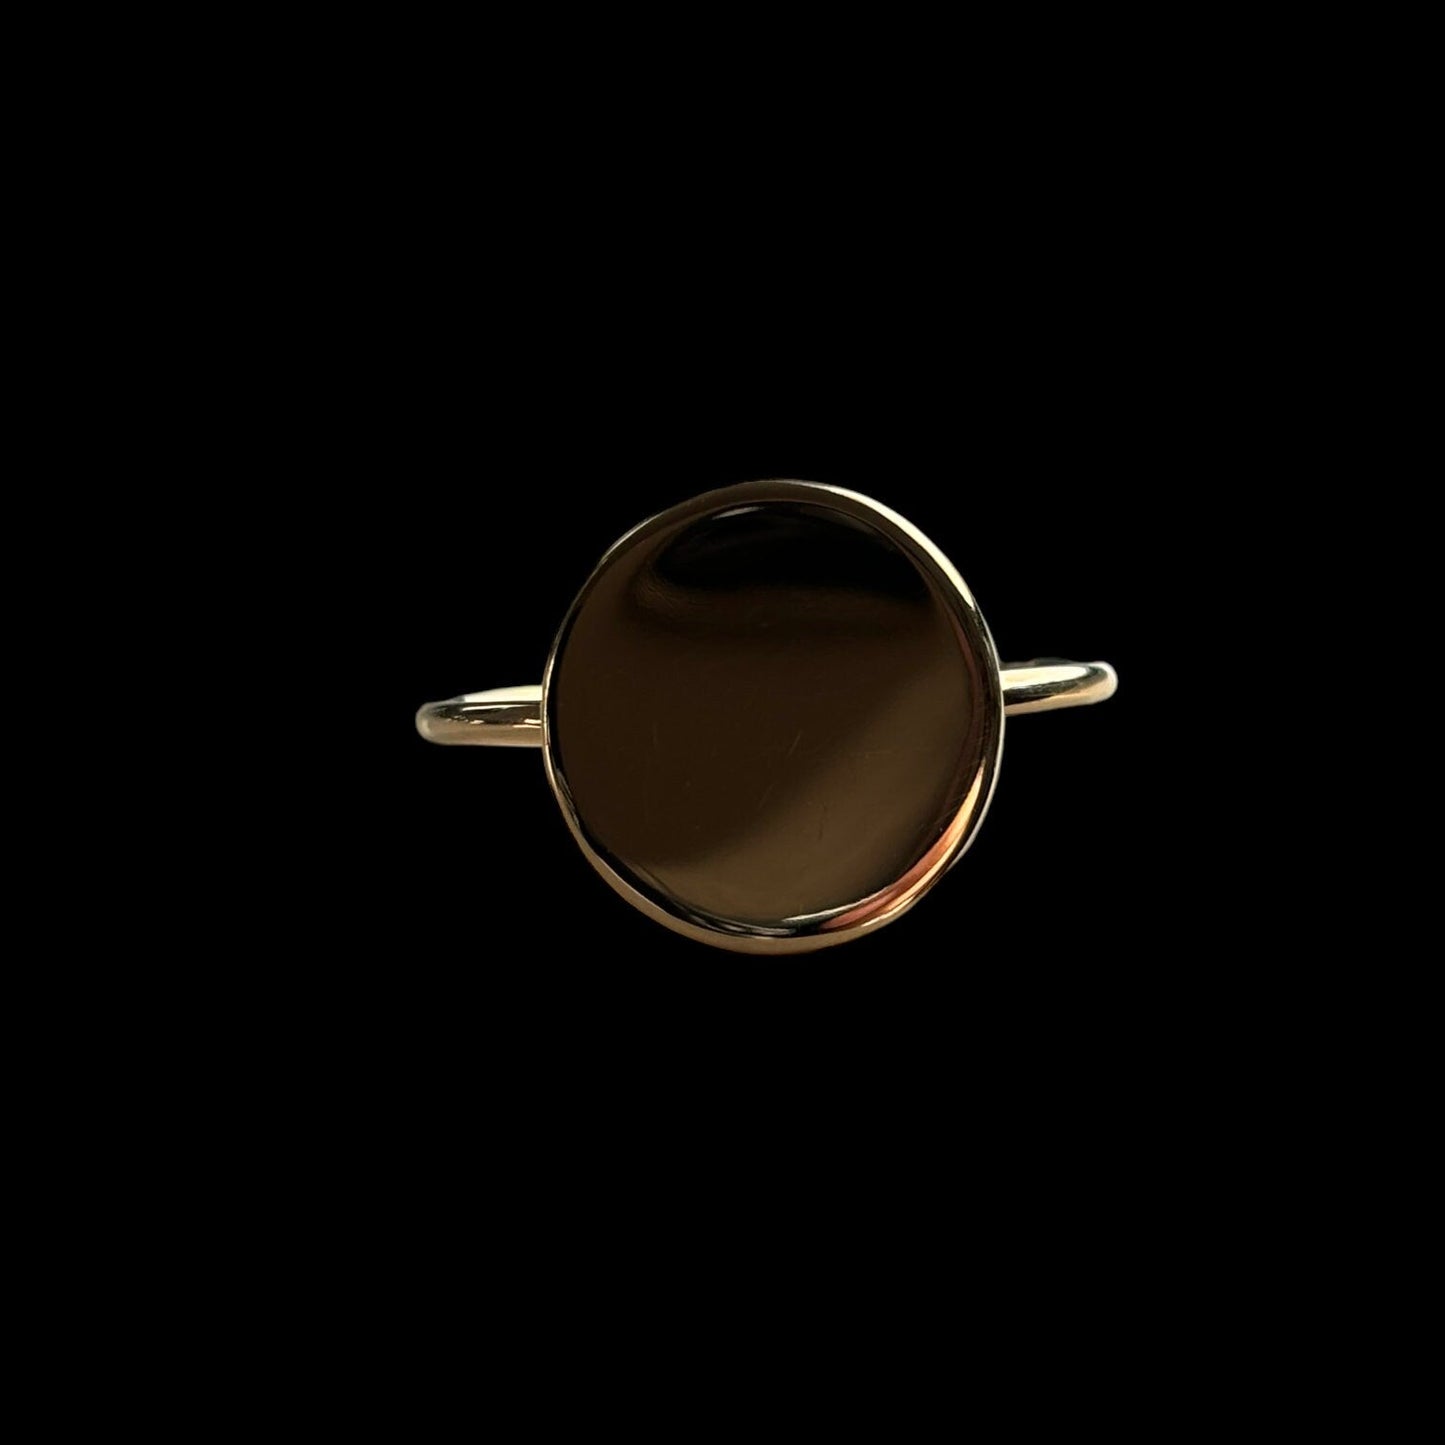 Signet Ring in 18k Round Rose Gold - R. Mouzannar Jewelry